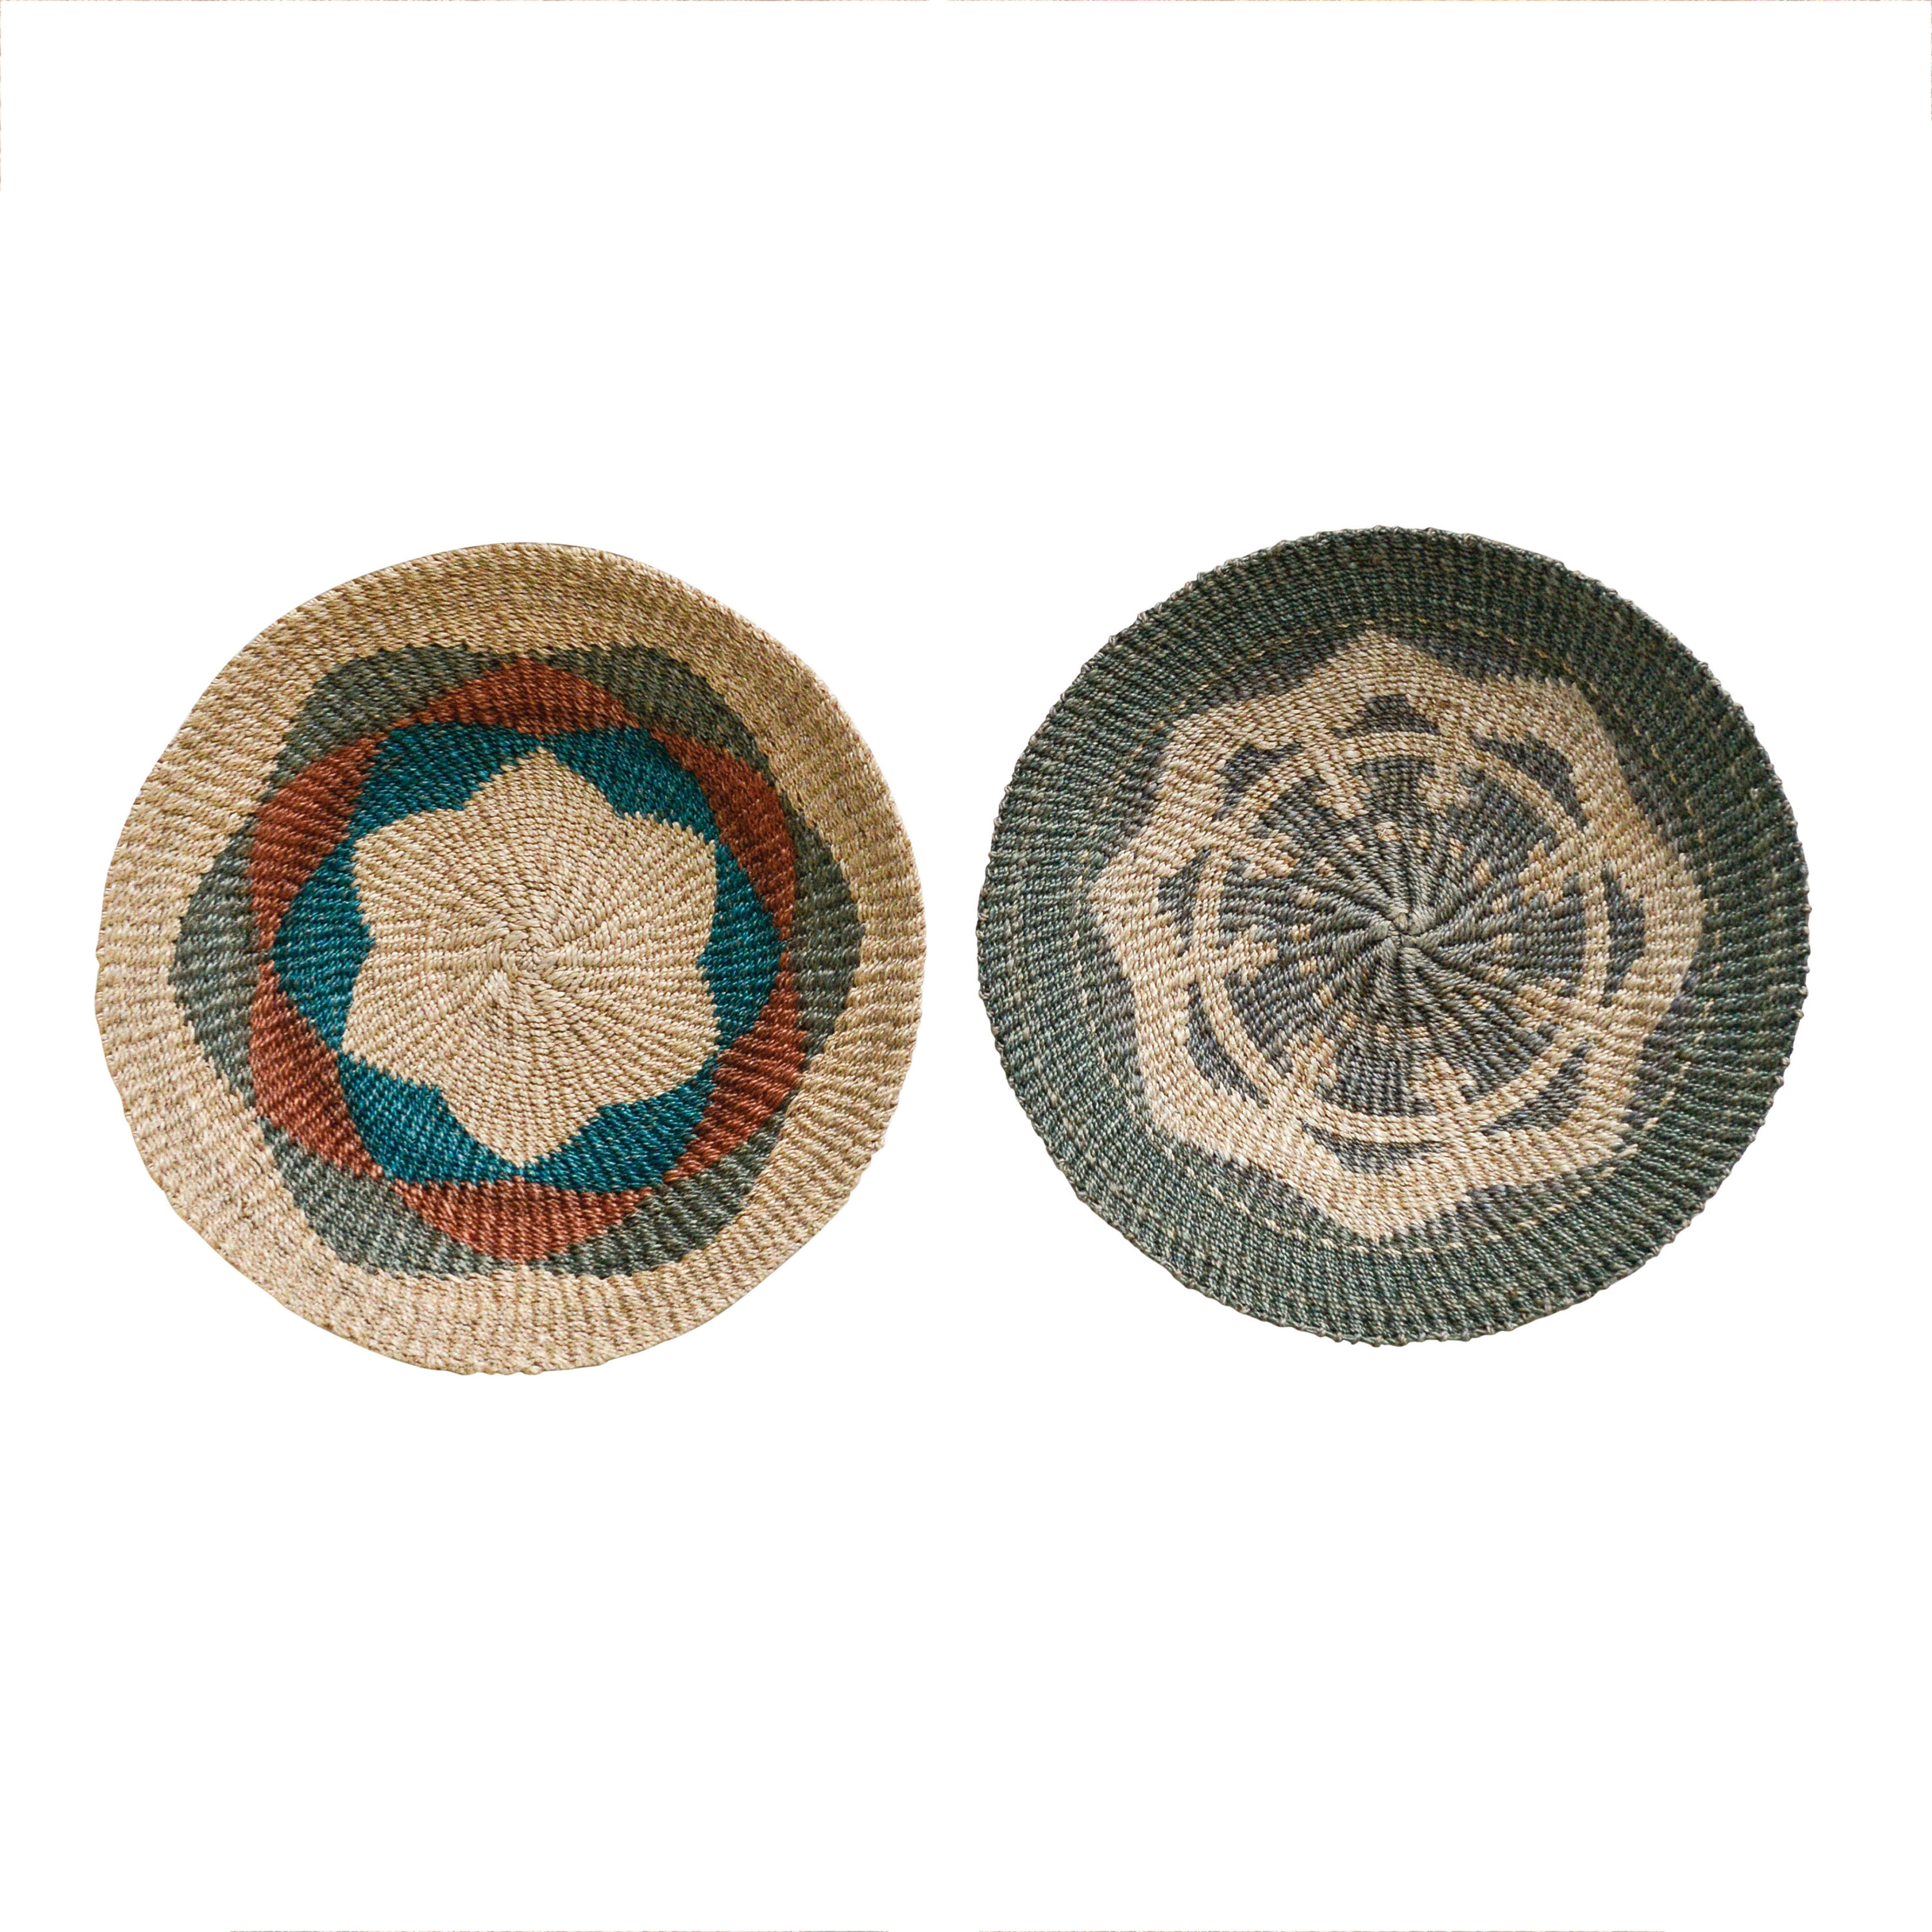 Medium Handwoven Abaca Wall Baskets (Set of 2 Styles) - Nomad Home